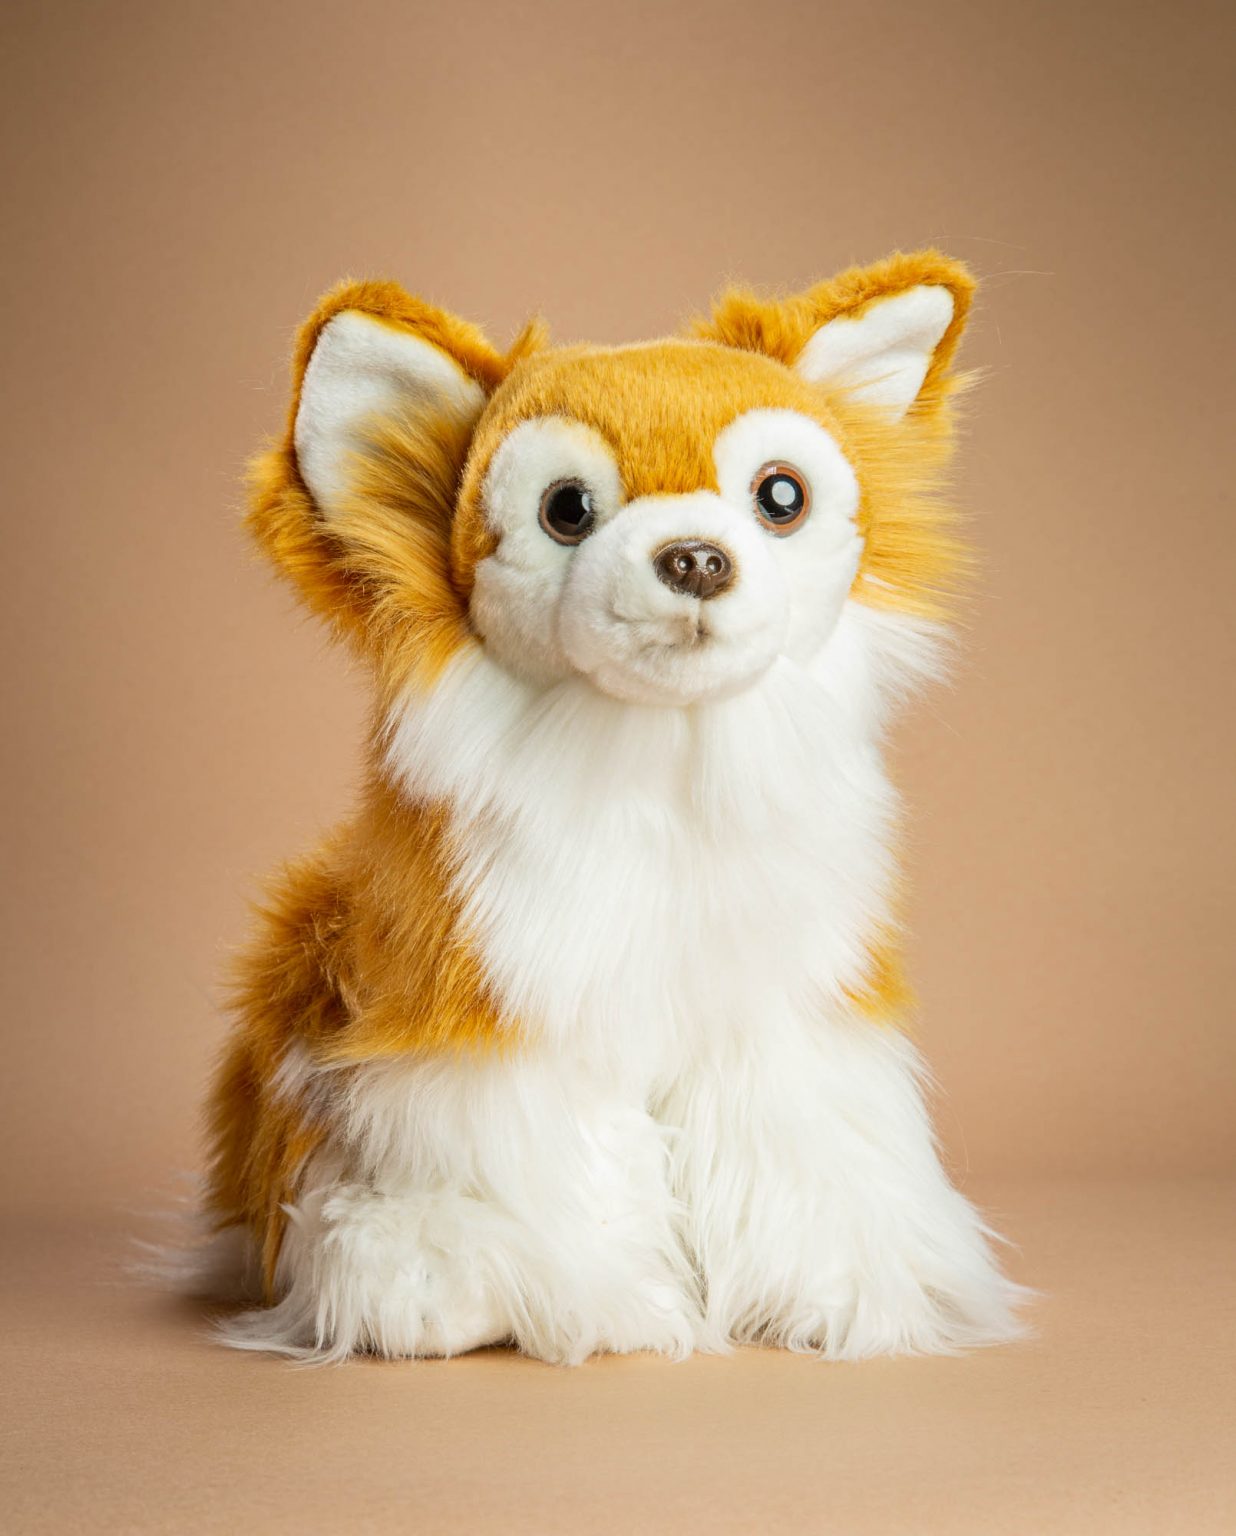 Long Haired Chihuahua soft toy gift - Send a Cuddly